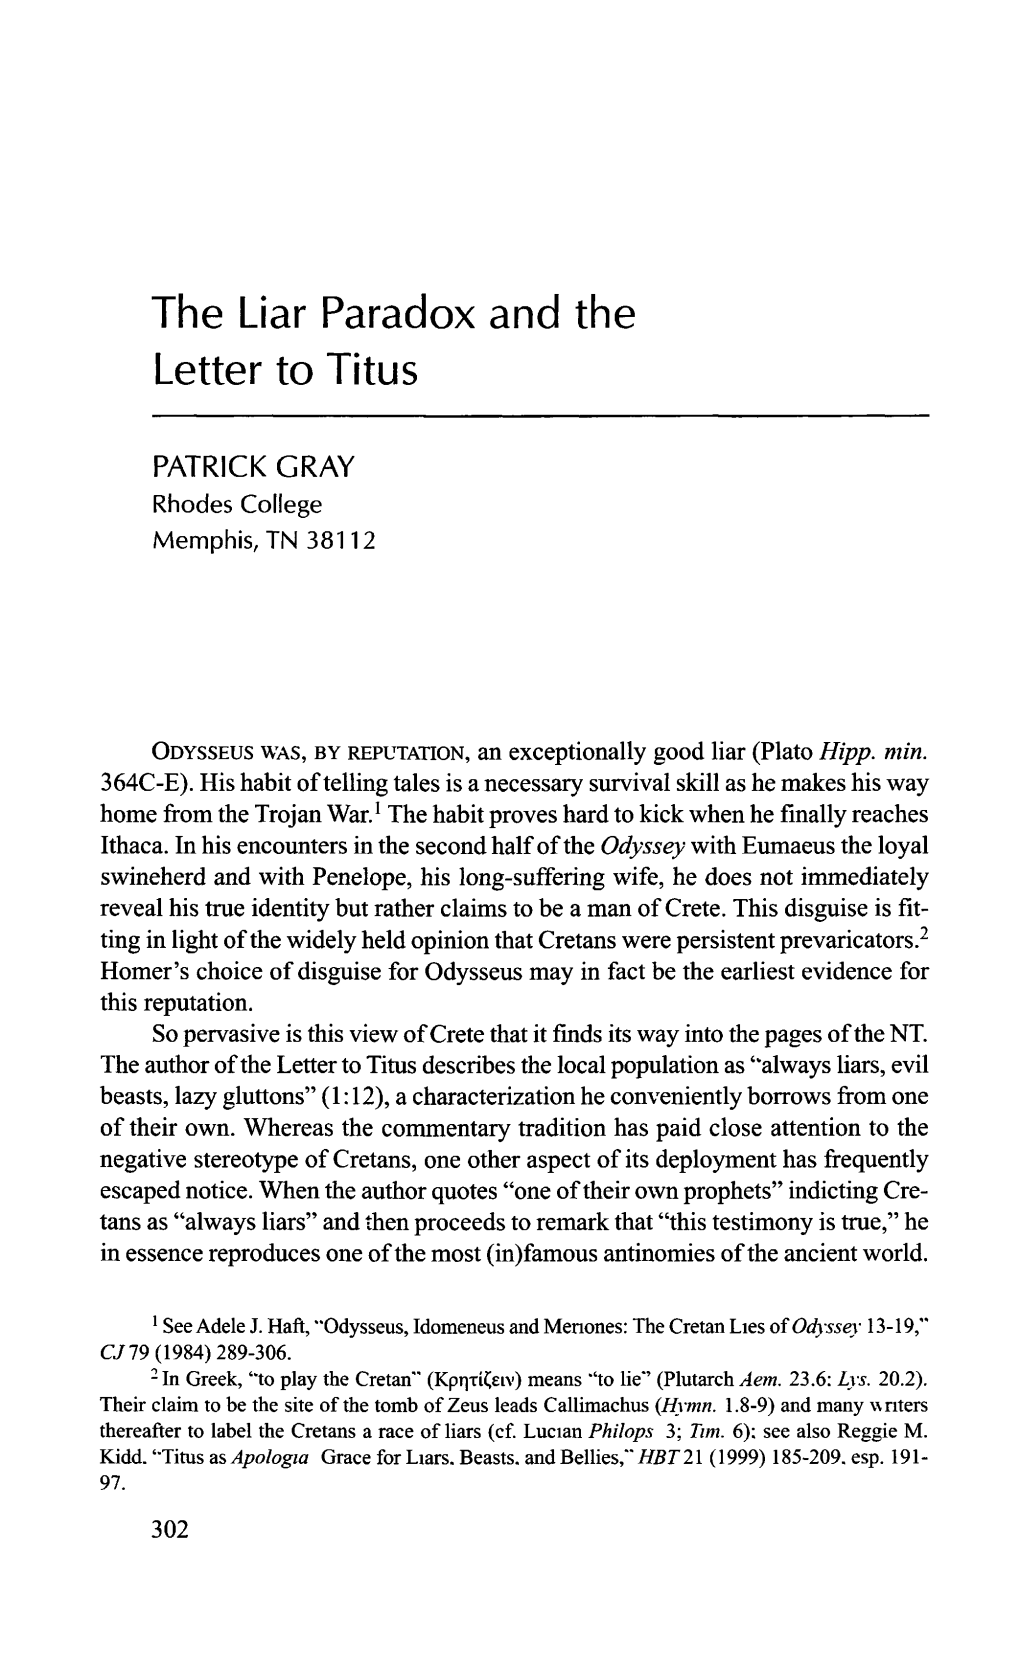 The Liar Paradox and the Letter to Titus